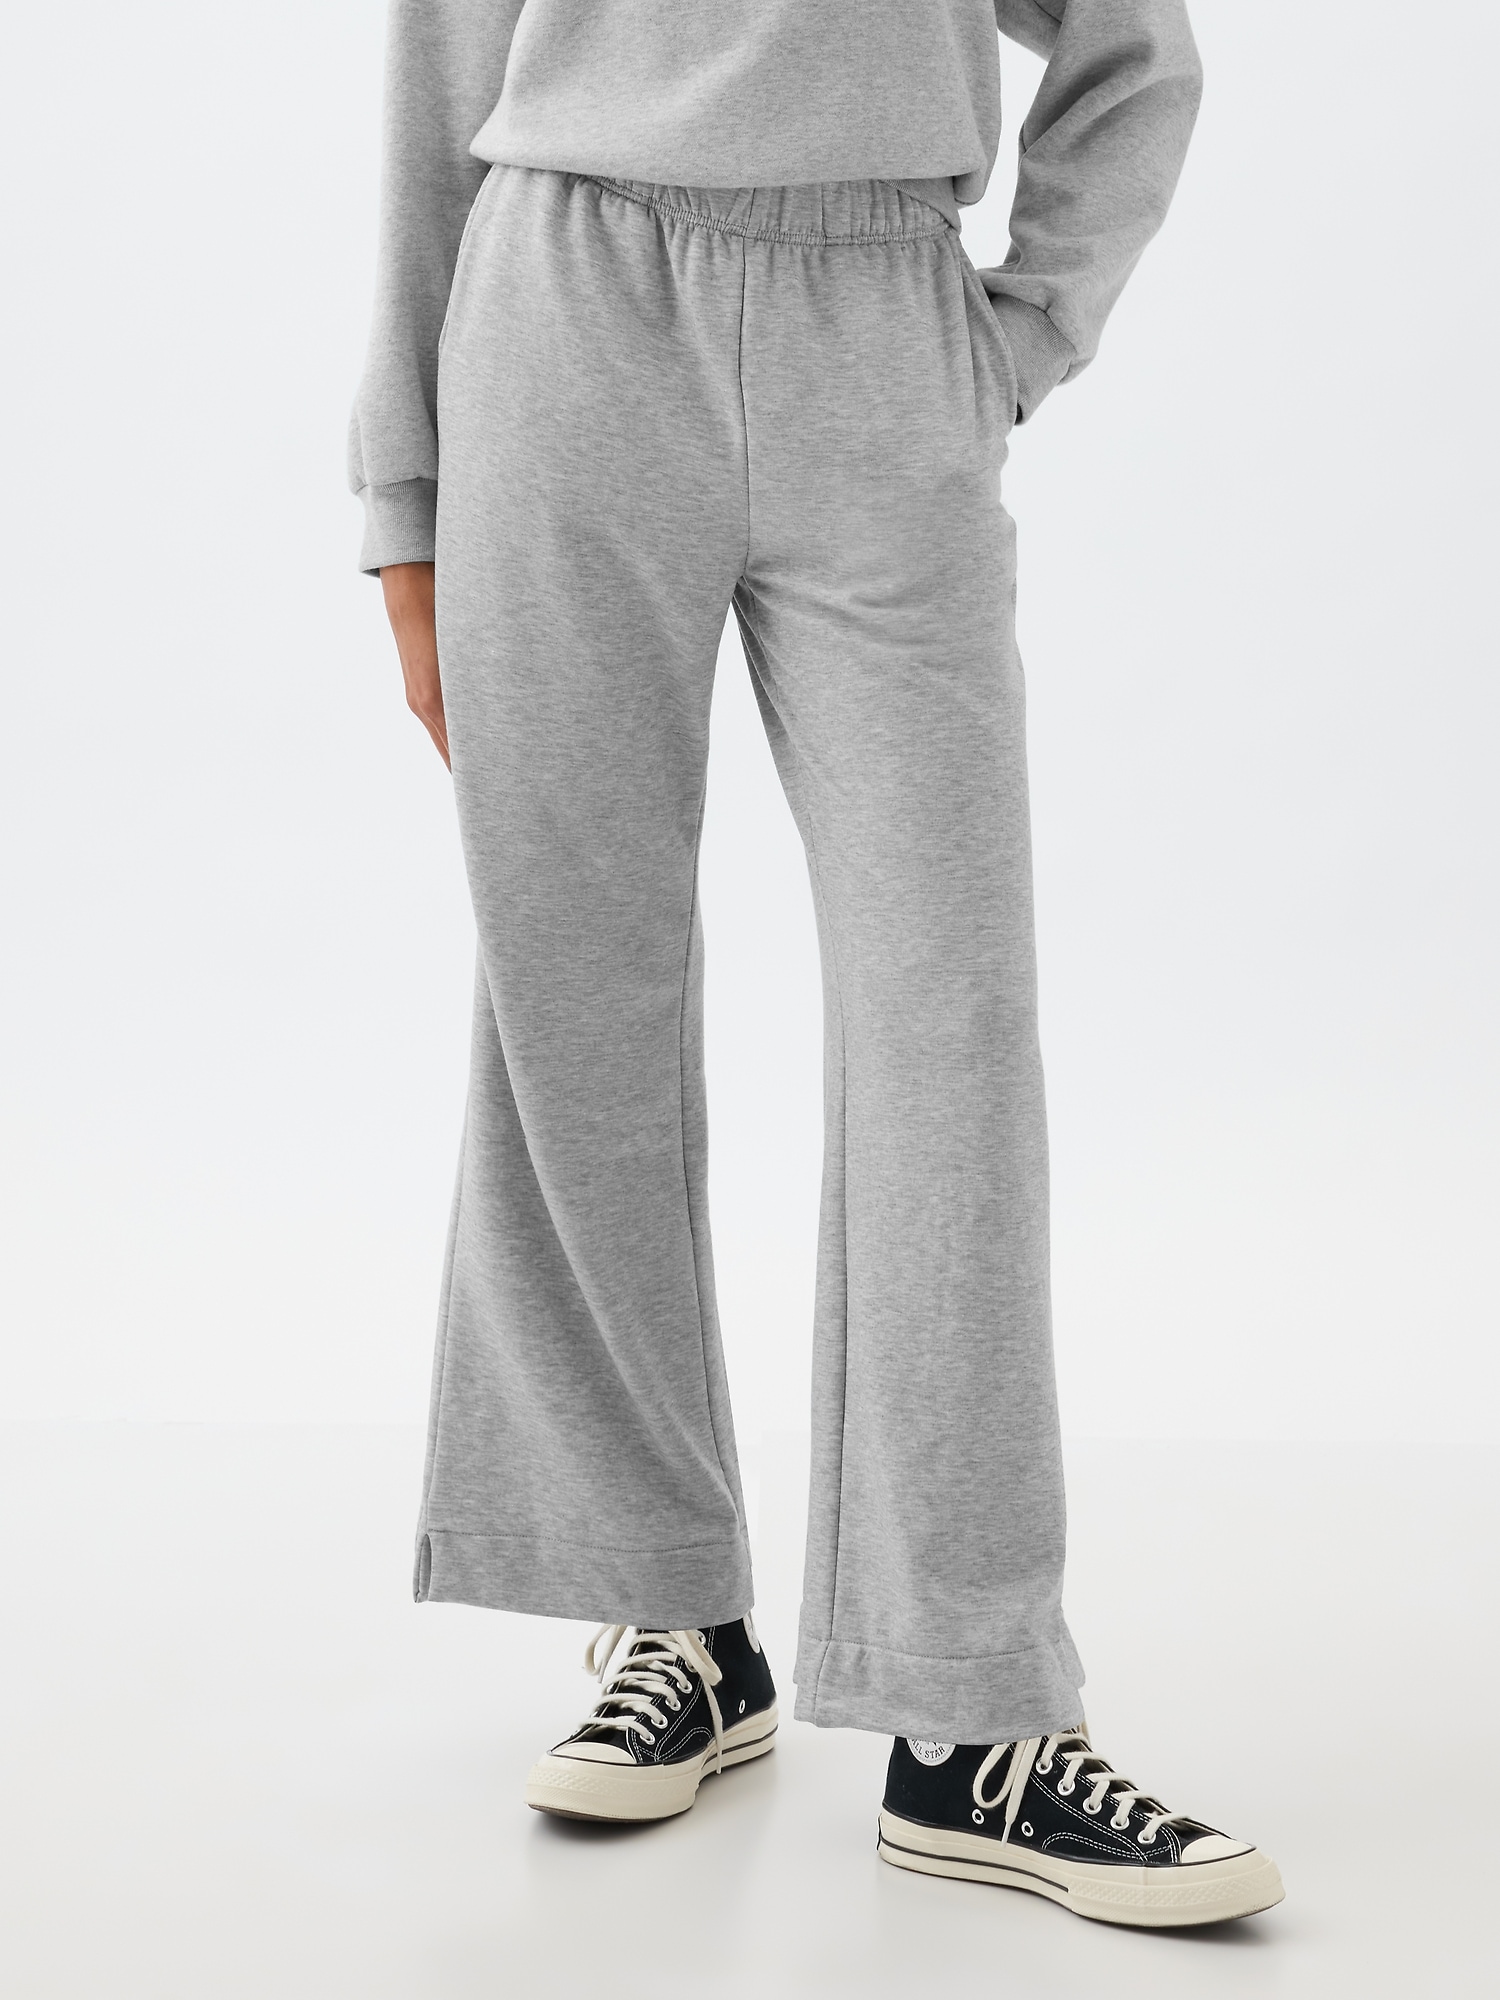  GWNWTT Women's Sweatpants Heather Gray Stacked Pants Sweatpants  (Color : Light Grey, Size : Medium) : Clothing, Shoes & Jewelry